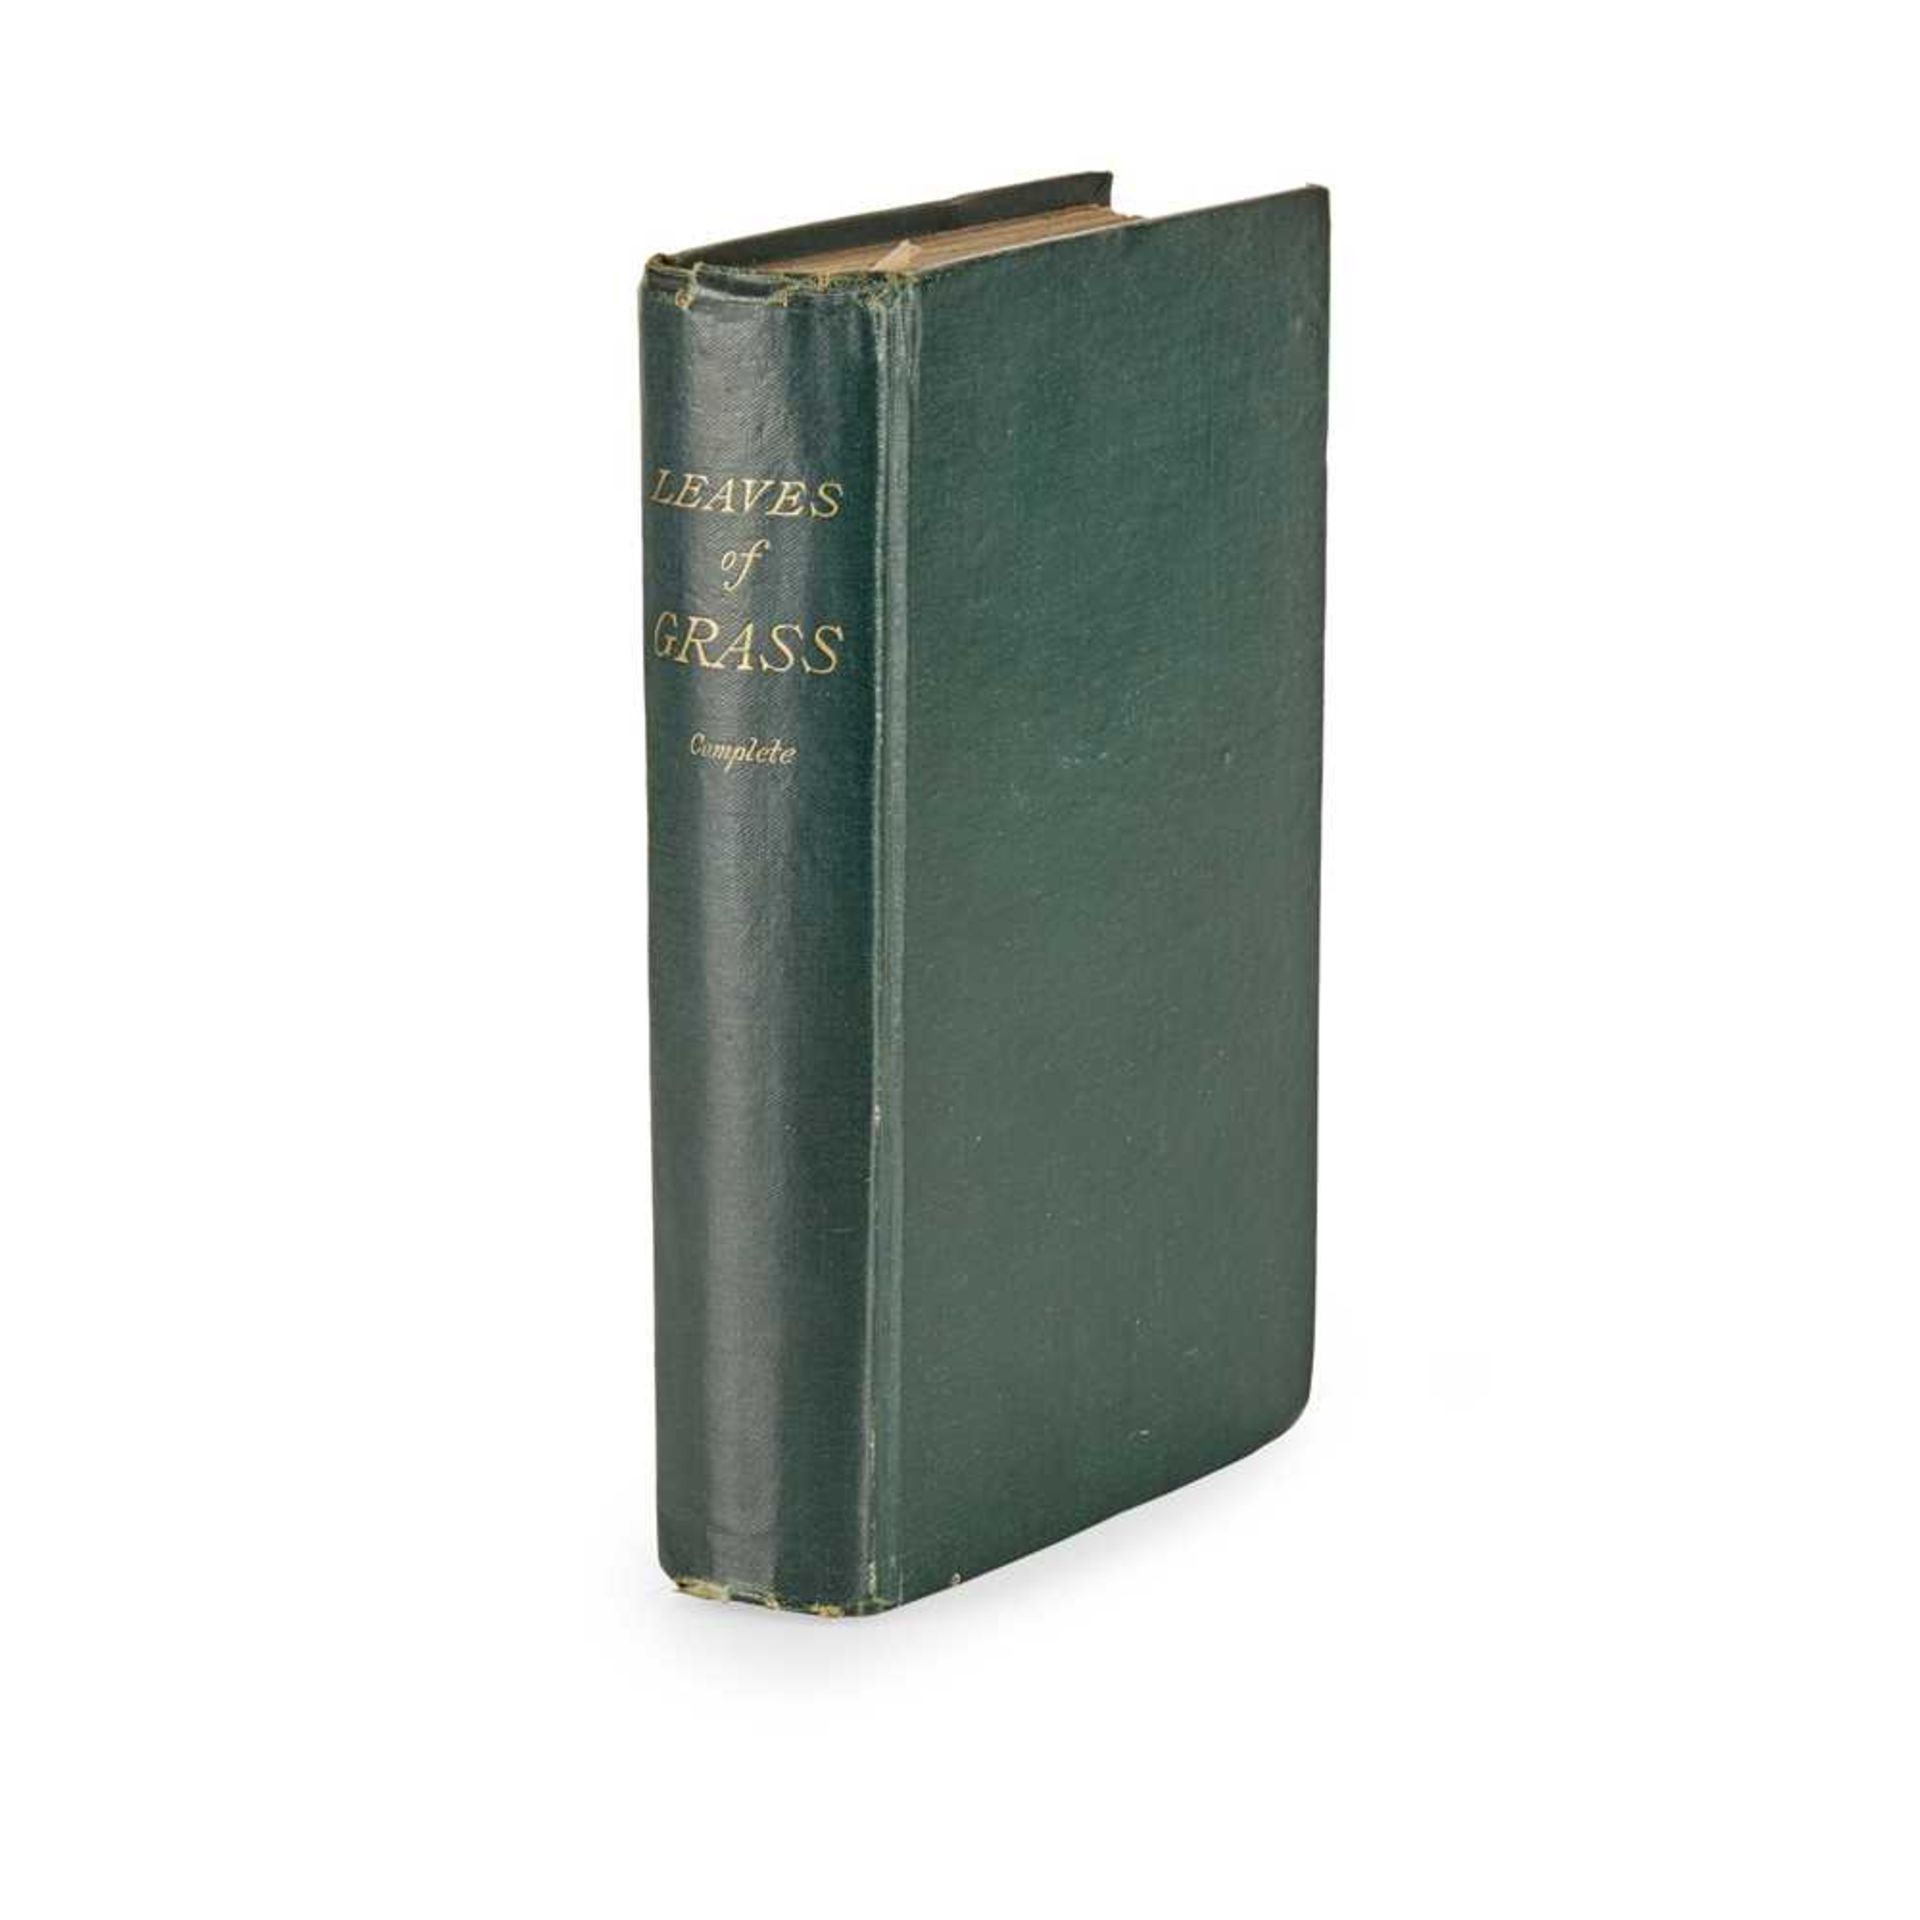 Whitman, Walt Leaves of Grass Washington DC, 1872. Sixth edition, second issue (of the first